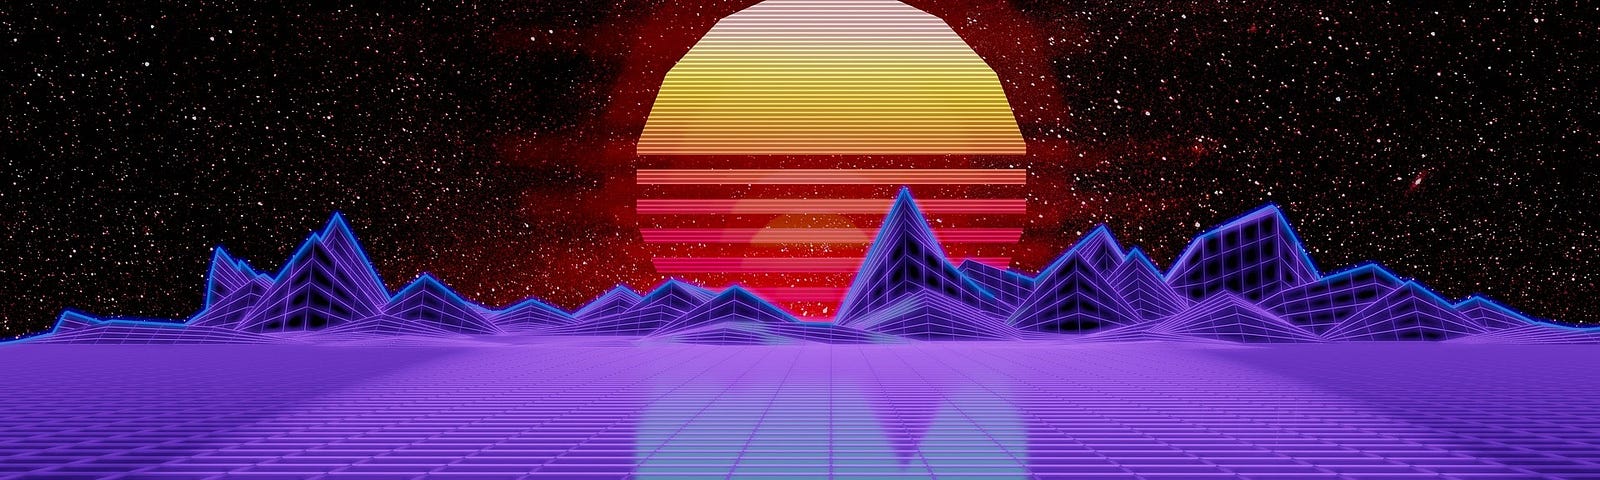 A digital illustration of a sun rising or setting above purple mountains, with a perspective grid extending to the bottom of the image.